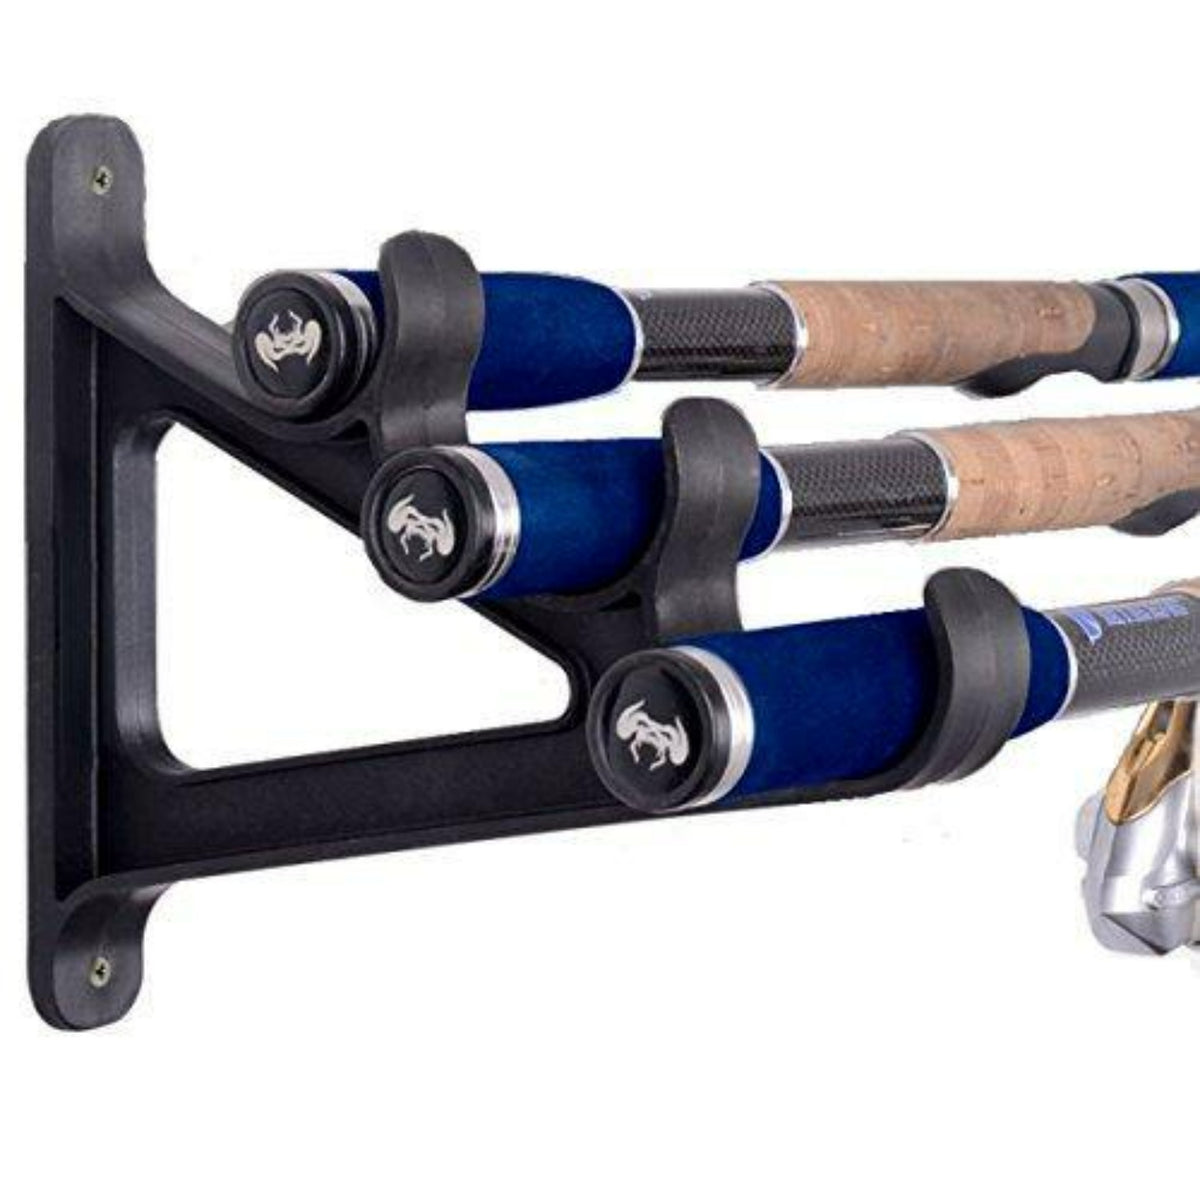  Good Life Rod Stand, Wall Mounted, Horizontal Fishing Rod,  Wall Hanging Rack, Rod Holder, Wall Mount Type, Compact, Space-Saving,  Holds 6 Fishing Rods, Black, Horizontal Type) : Sports & Outdoors